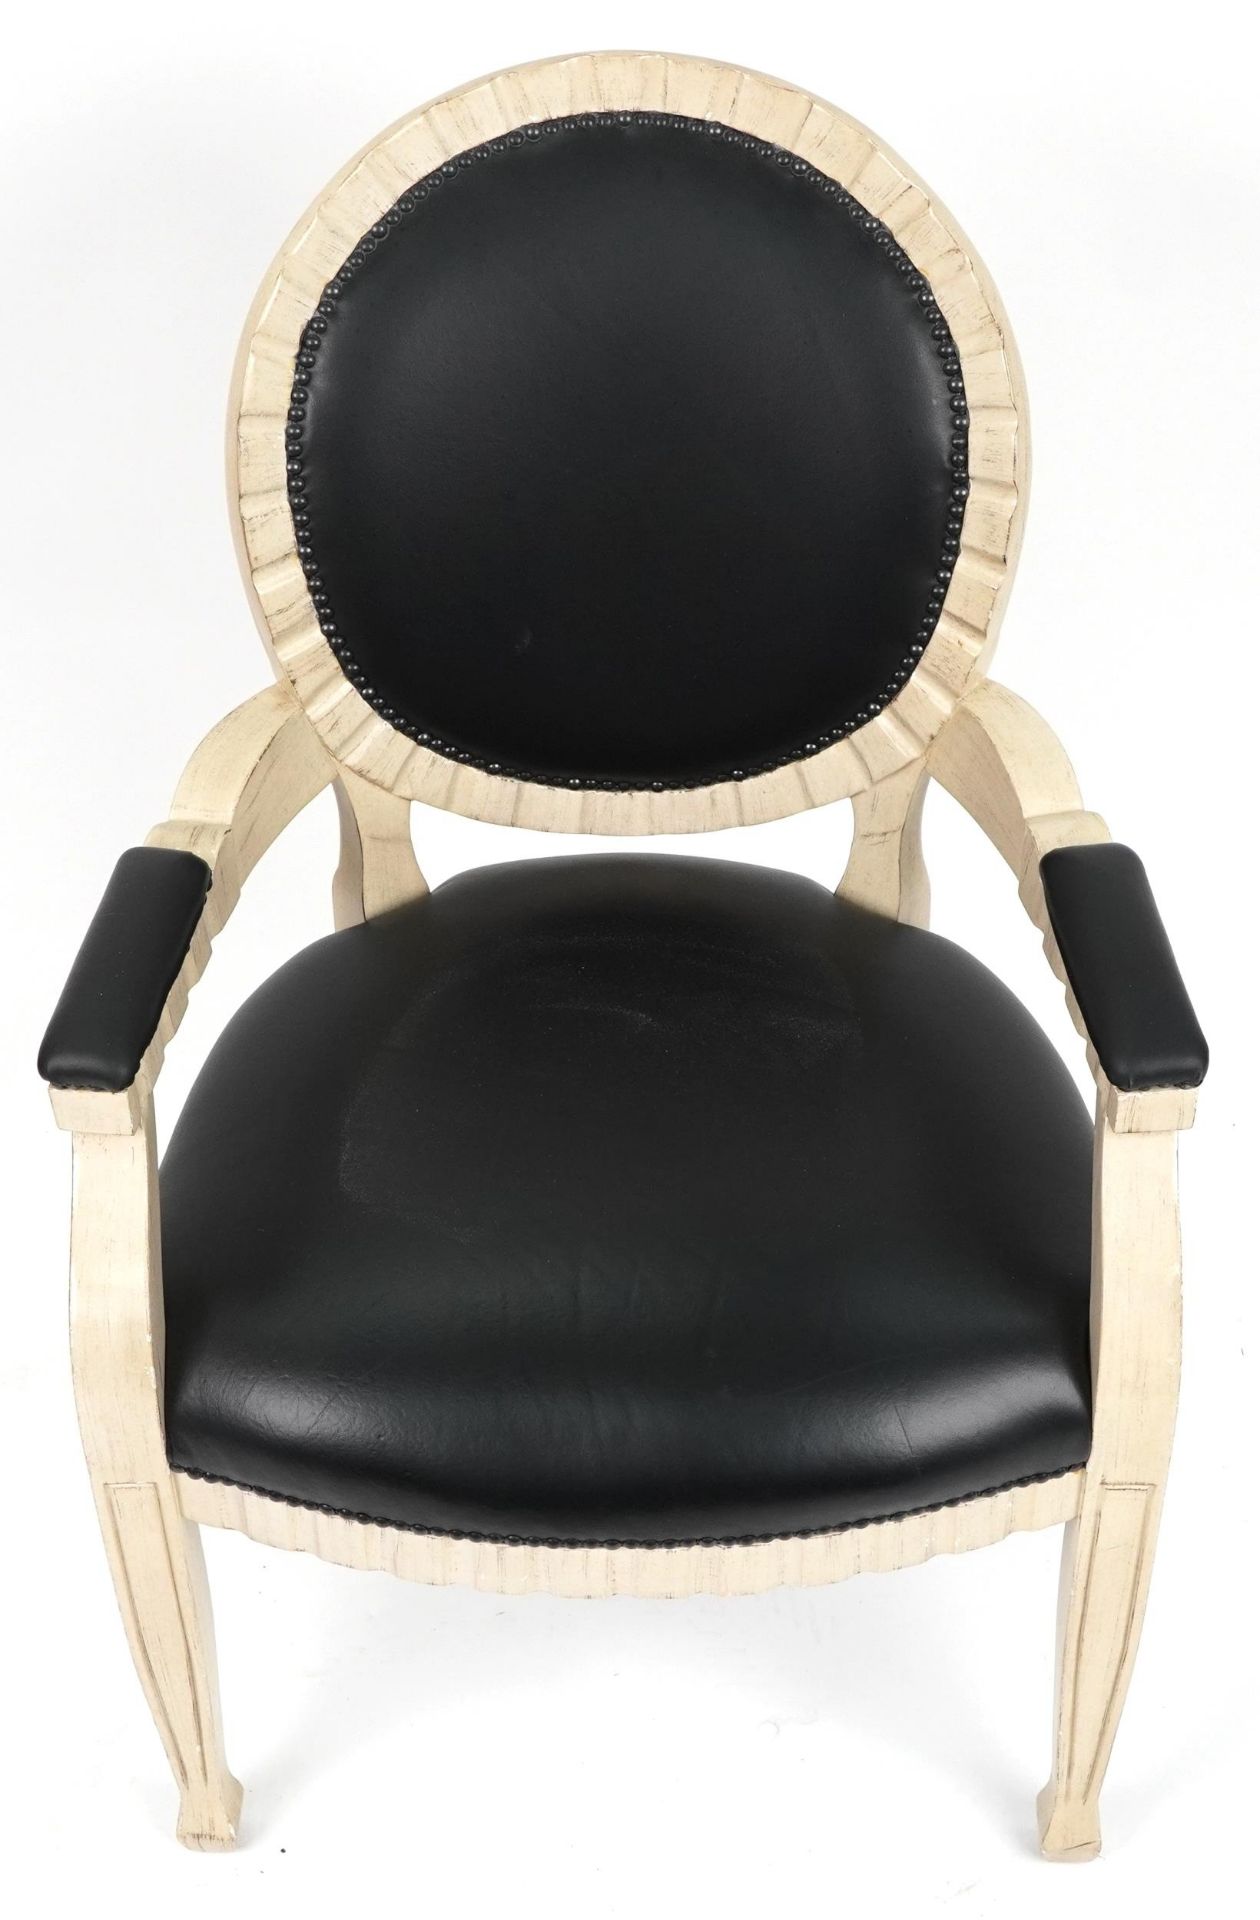 French Empire style cream bedroom chair with black vinyl upholstered back, seat and elbow pads, 98. - Image 3 of 4